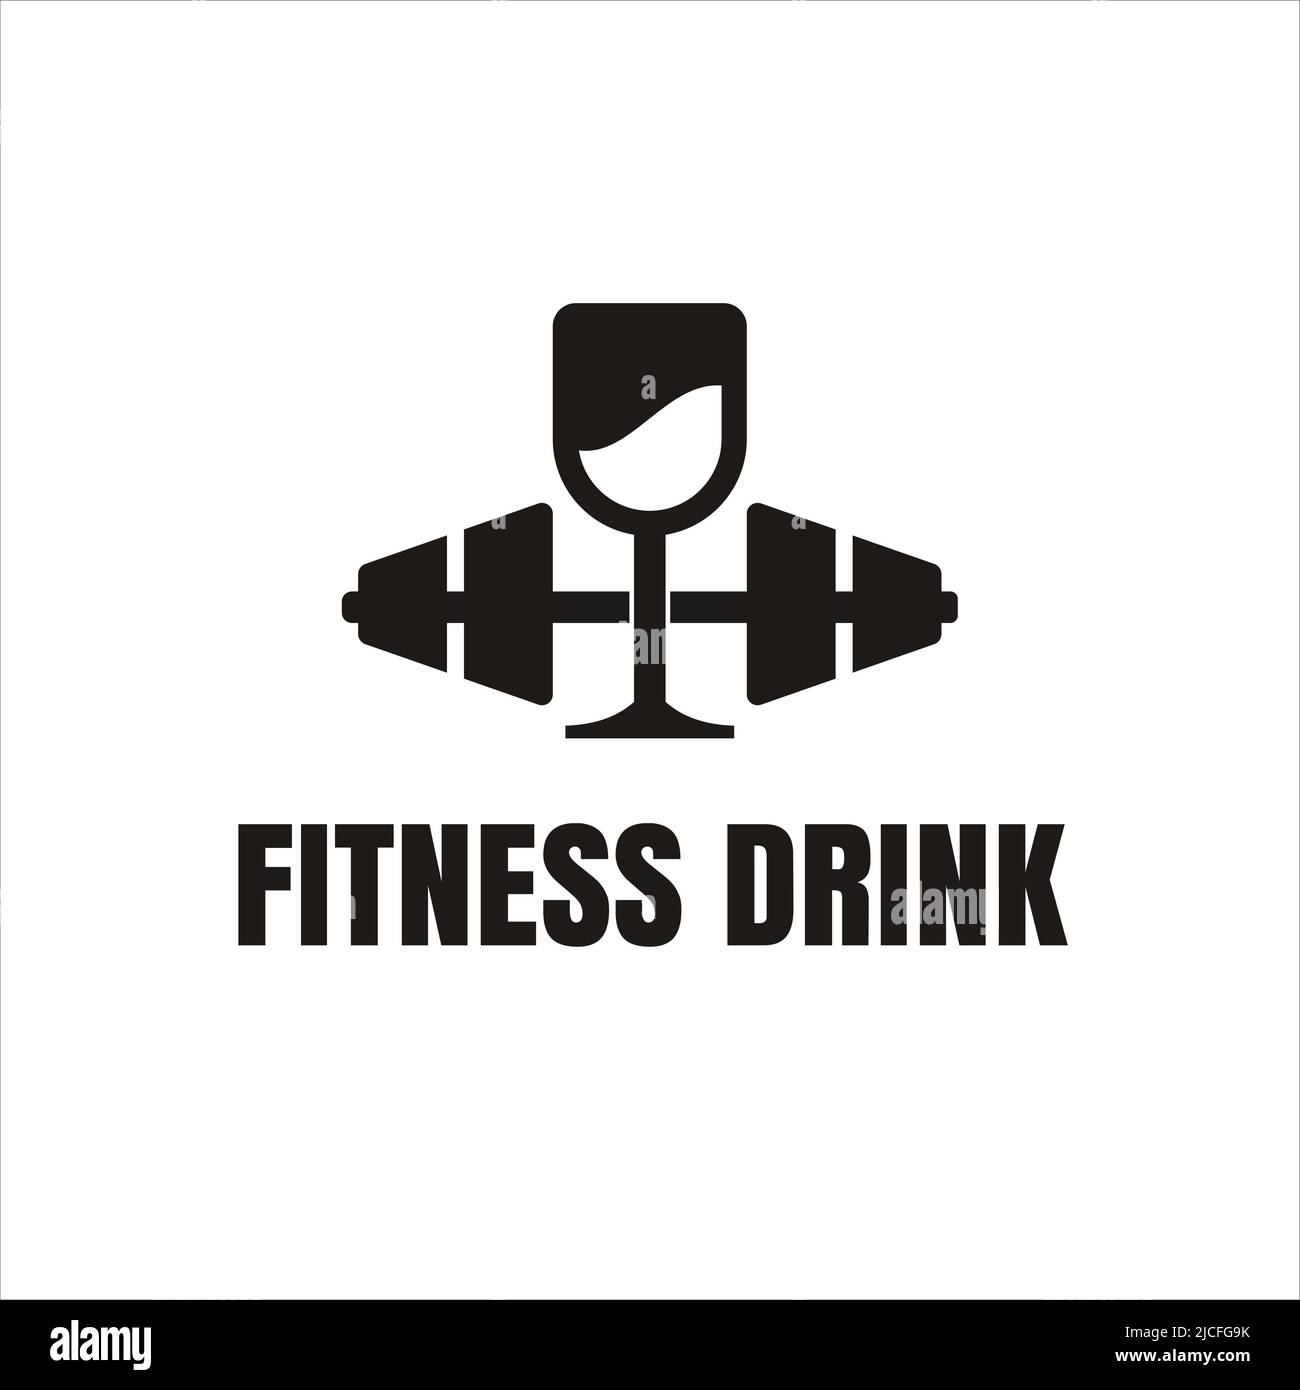 Fitness club and gym logo design template with barbell symbol and drinking glasses Stock Vector